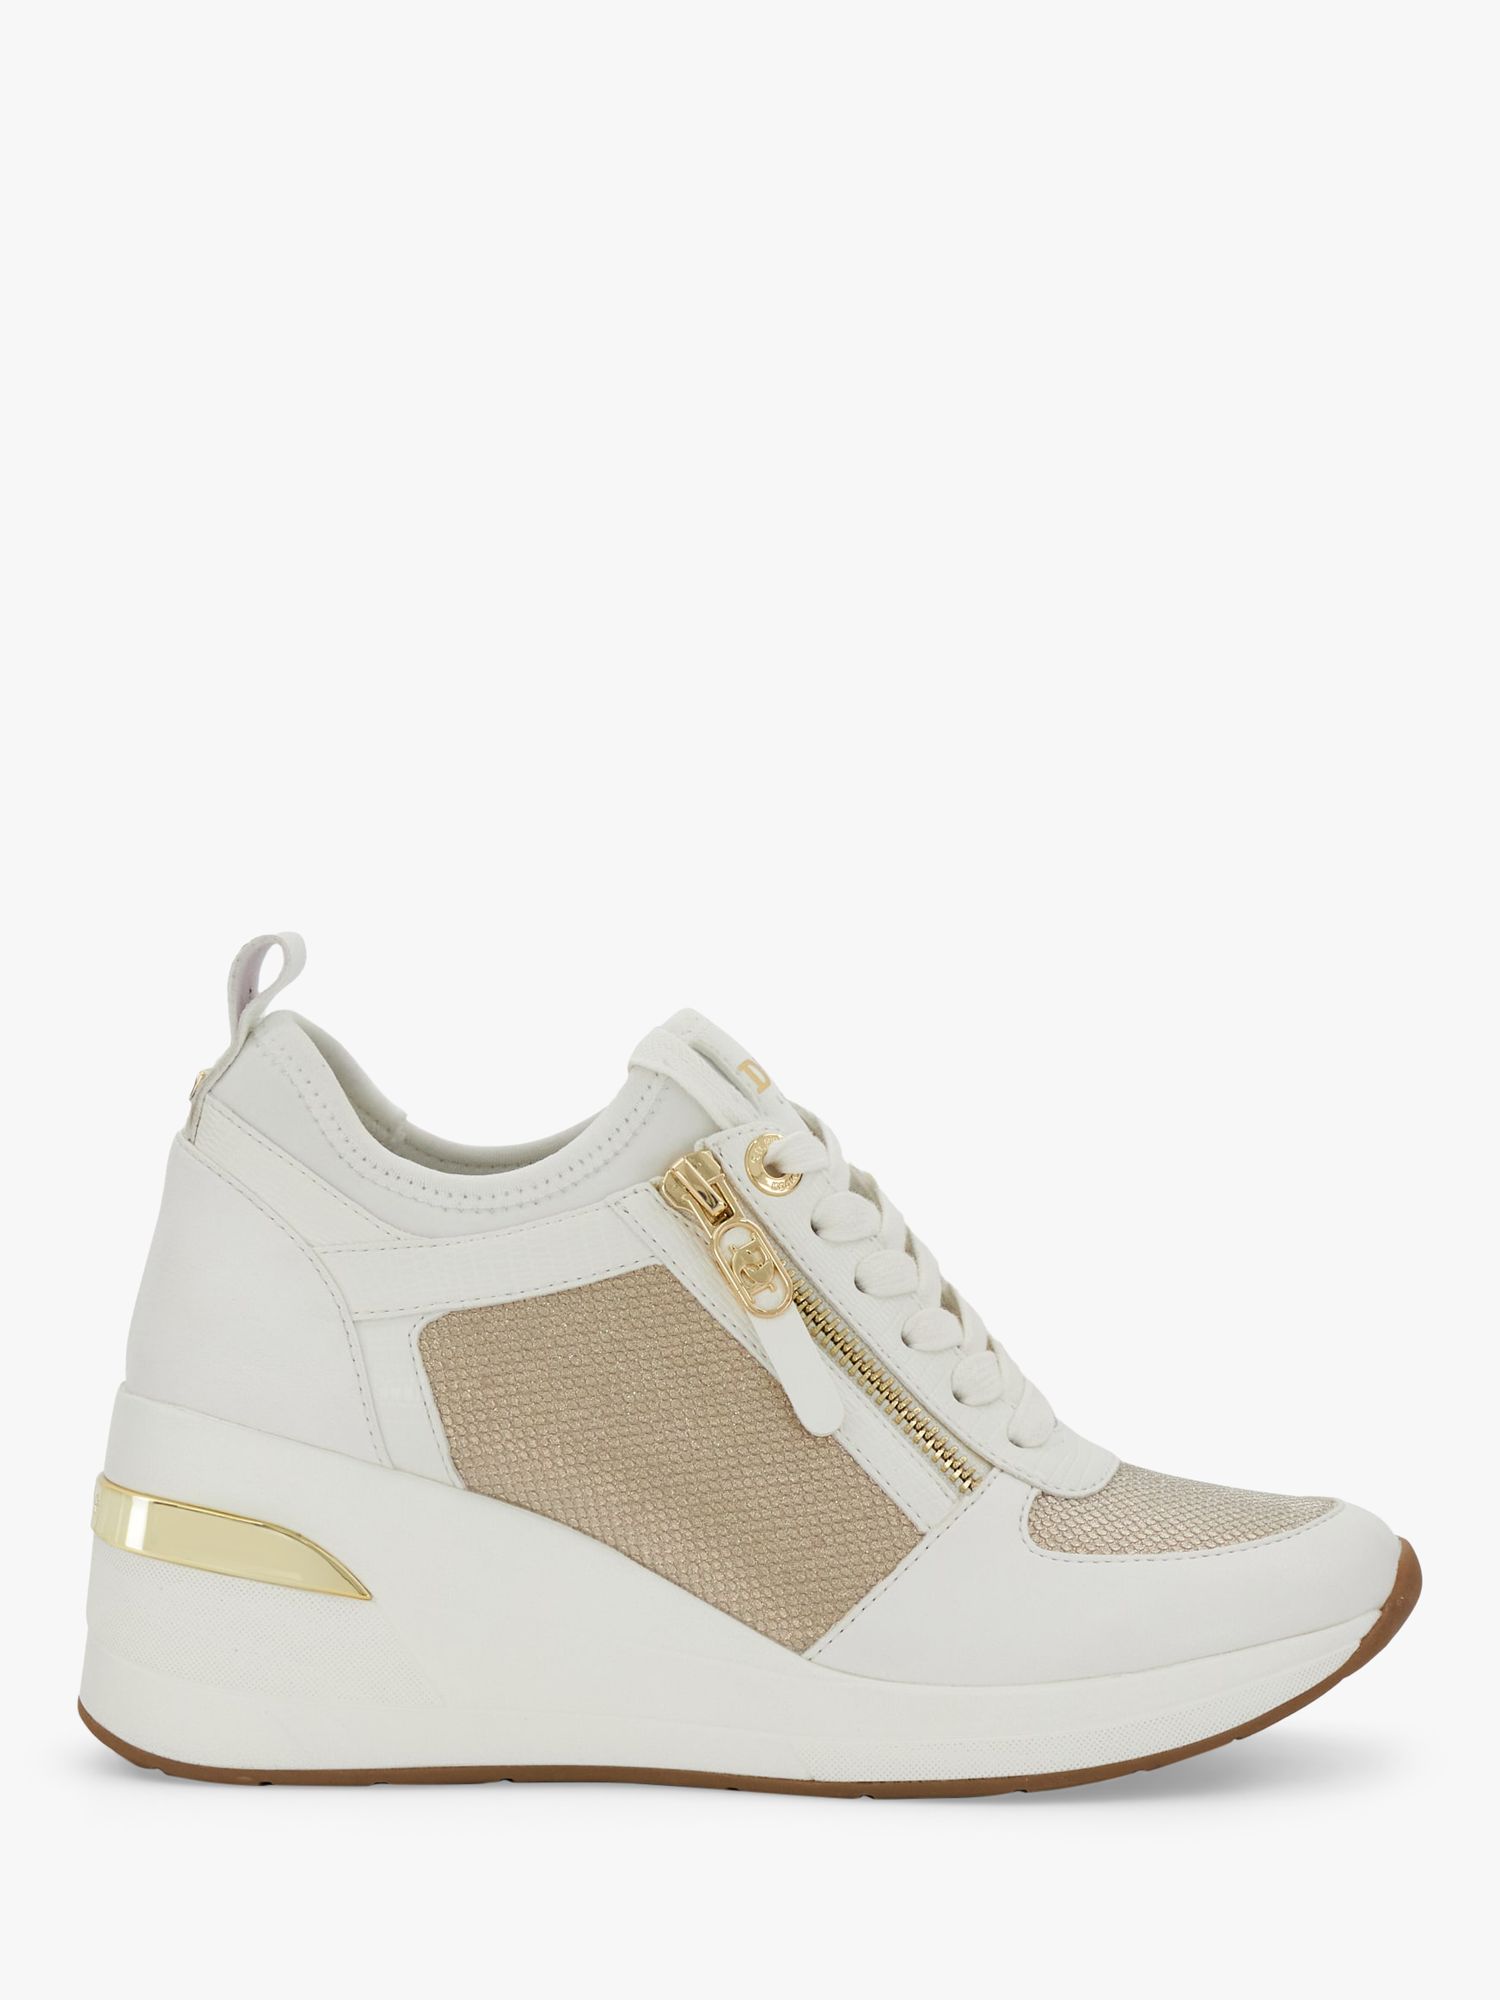 Dune Eiline Leather Mix Lace Up Wedge Trainers, Gold at John Lewis ...